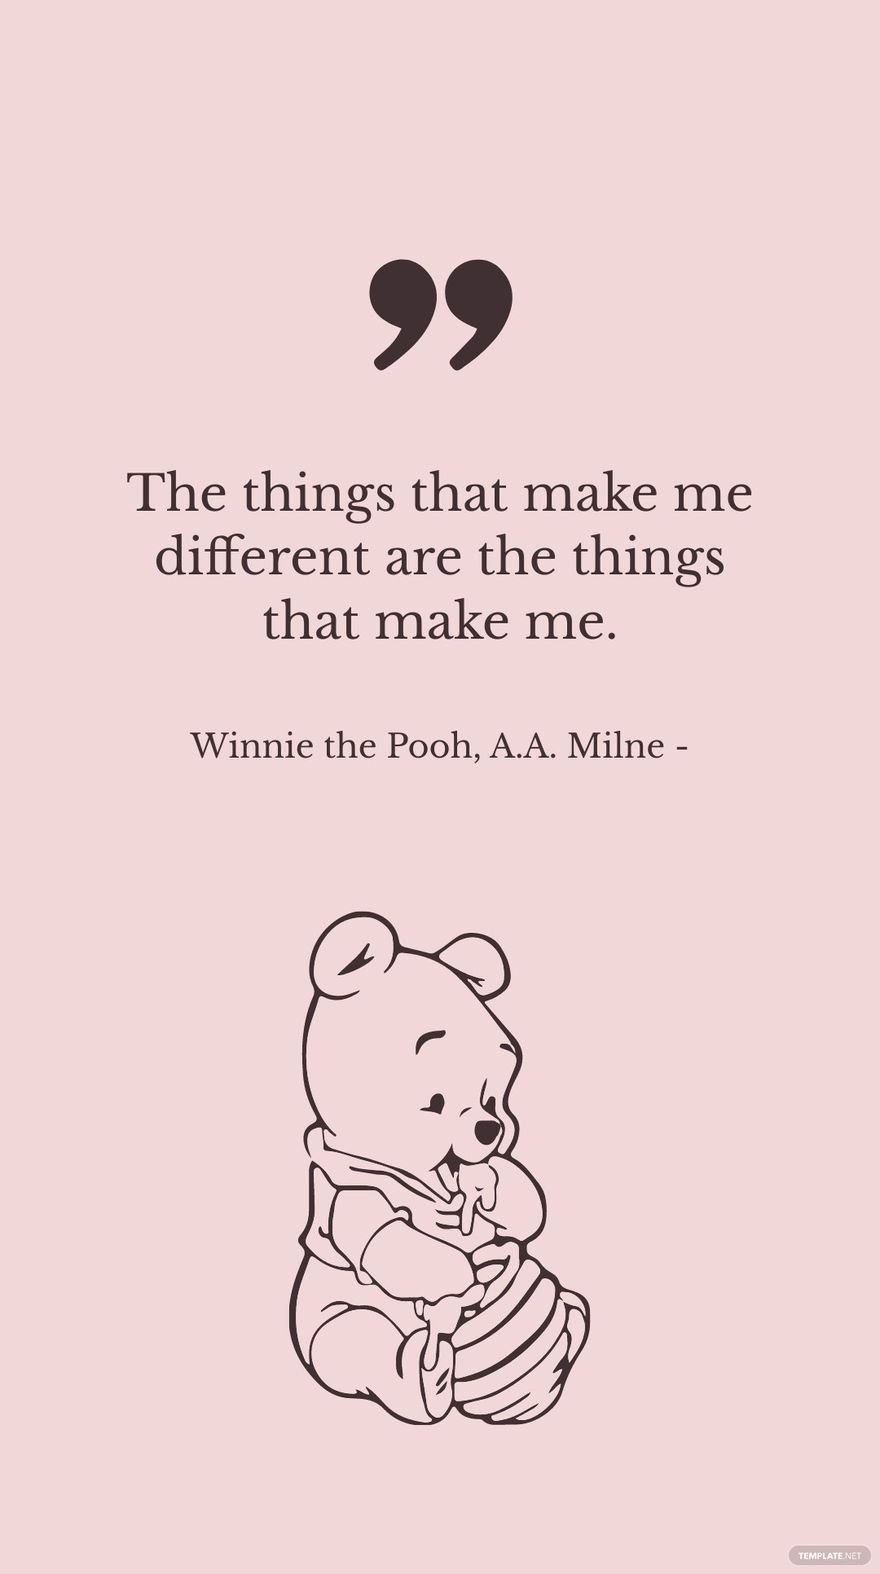 Winnie the Pooh, A.A. Milne - The things that make me different are the things that make me.